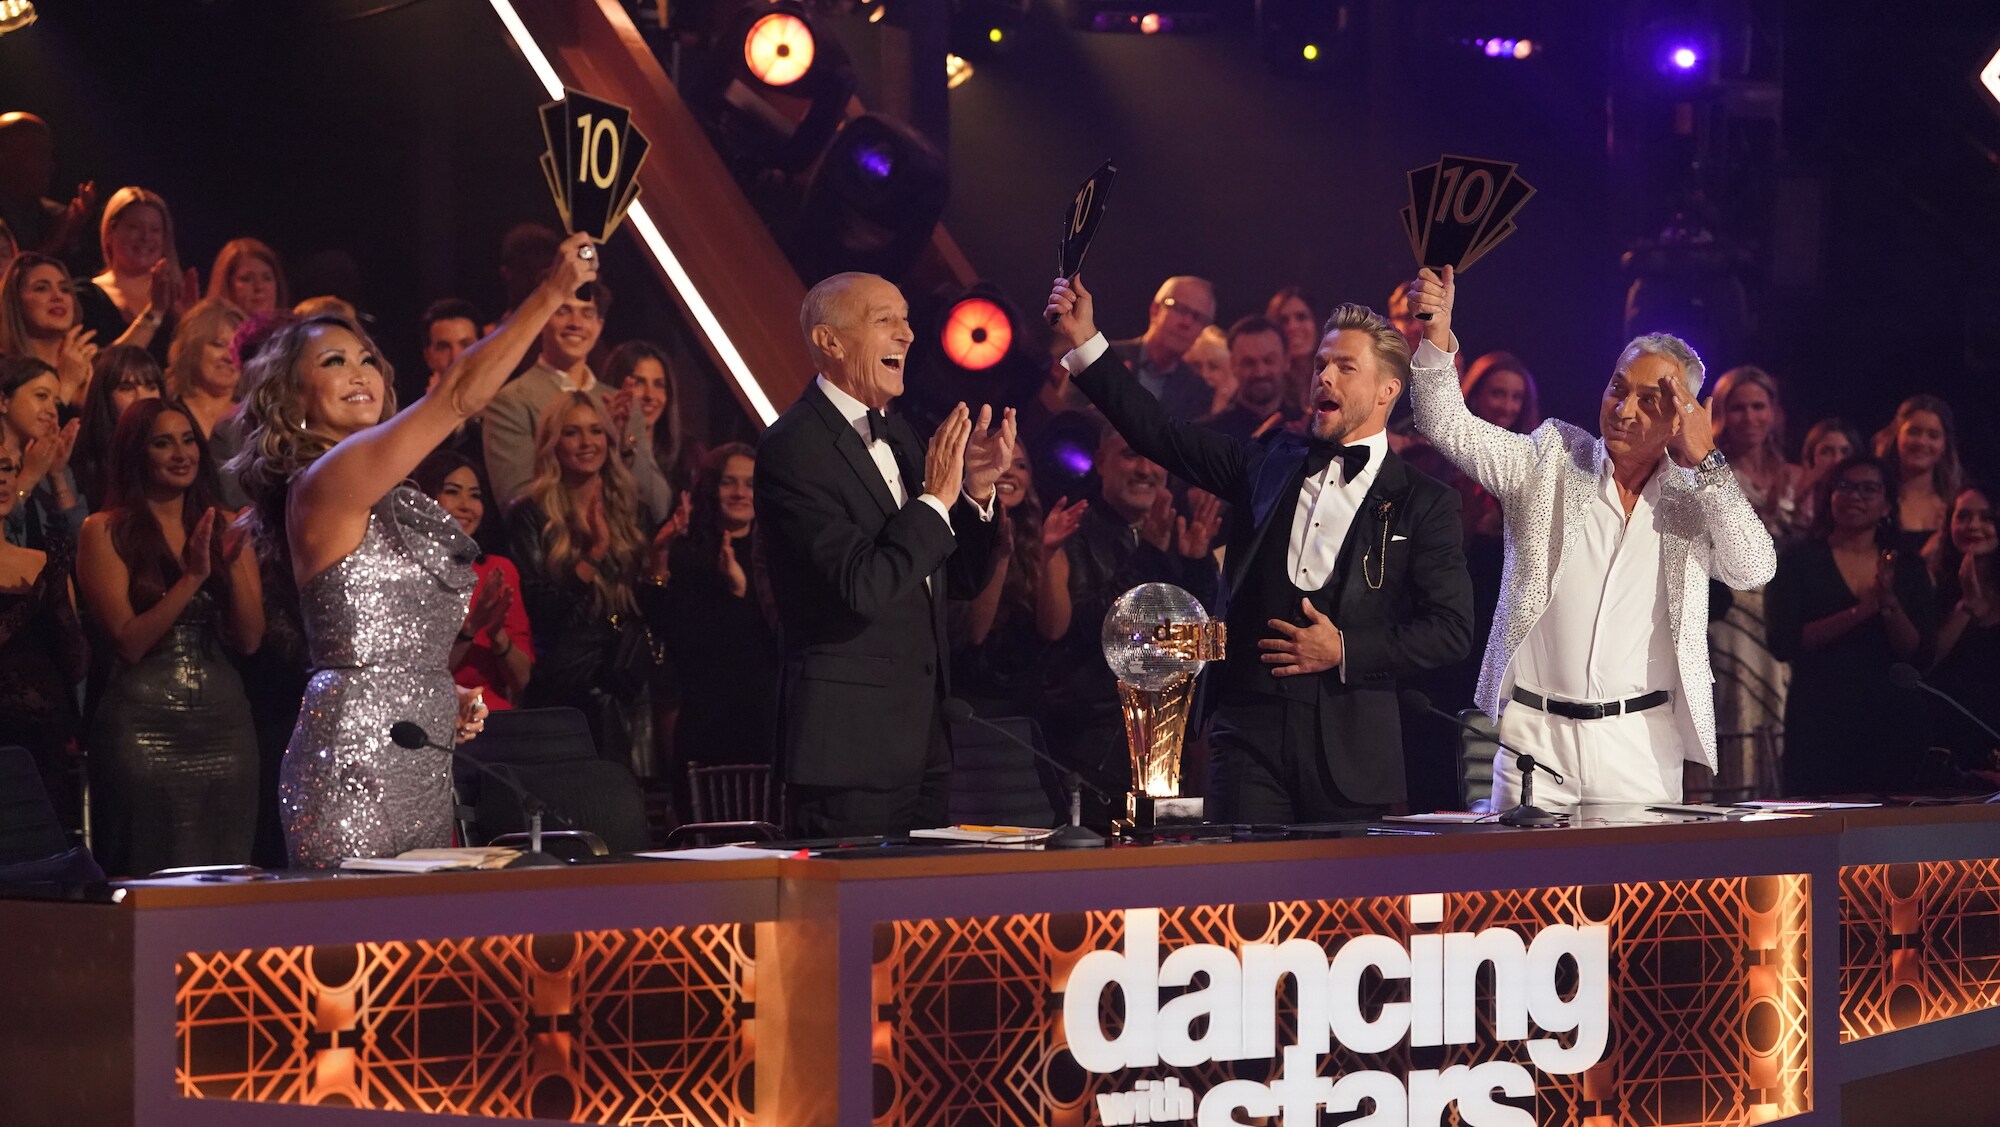 DANCING WITH THE STARS - “Finale” – The four finalists perform their final two routines in hopes of winning the mirrorball trophy. Each couple will perform a redemption dance and an unforgettable freestyle routine. A new episode of “Dancing with the Stars” will stream live MONDAY, NOV. 21 (8:00pm ET / 5:00pm PT), on Disney+. (ABC/Eric McCandless) CARRIE ANN INABA, LEN GOODMAN, DEREK HOUGH, BRUNO TONIOLI